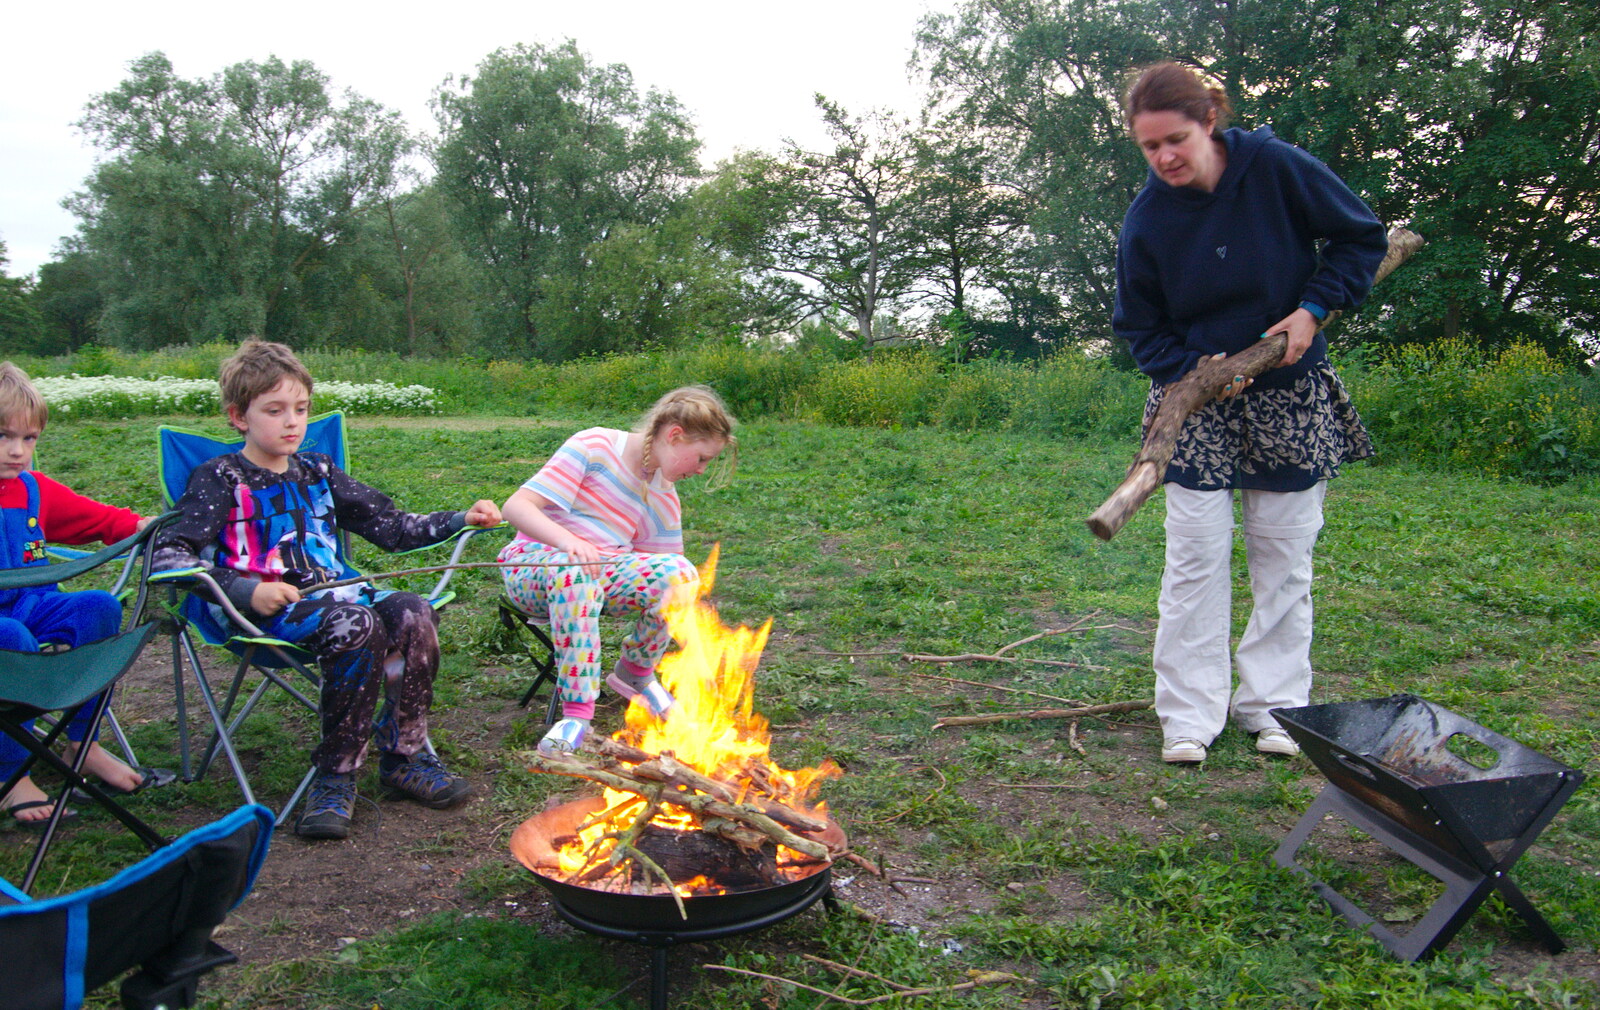 Isobel gets a massive stick for the fire from Camping at Three Rivers, Geldeston, Norfolk - 1st June 2019